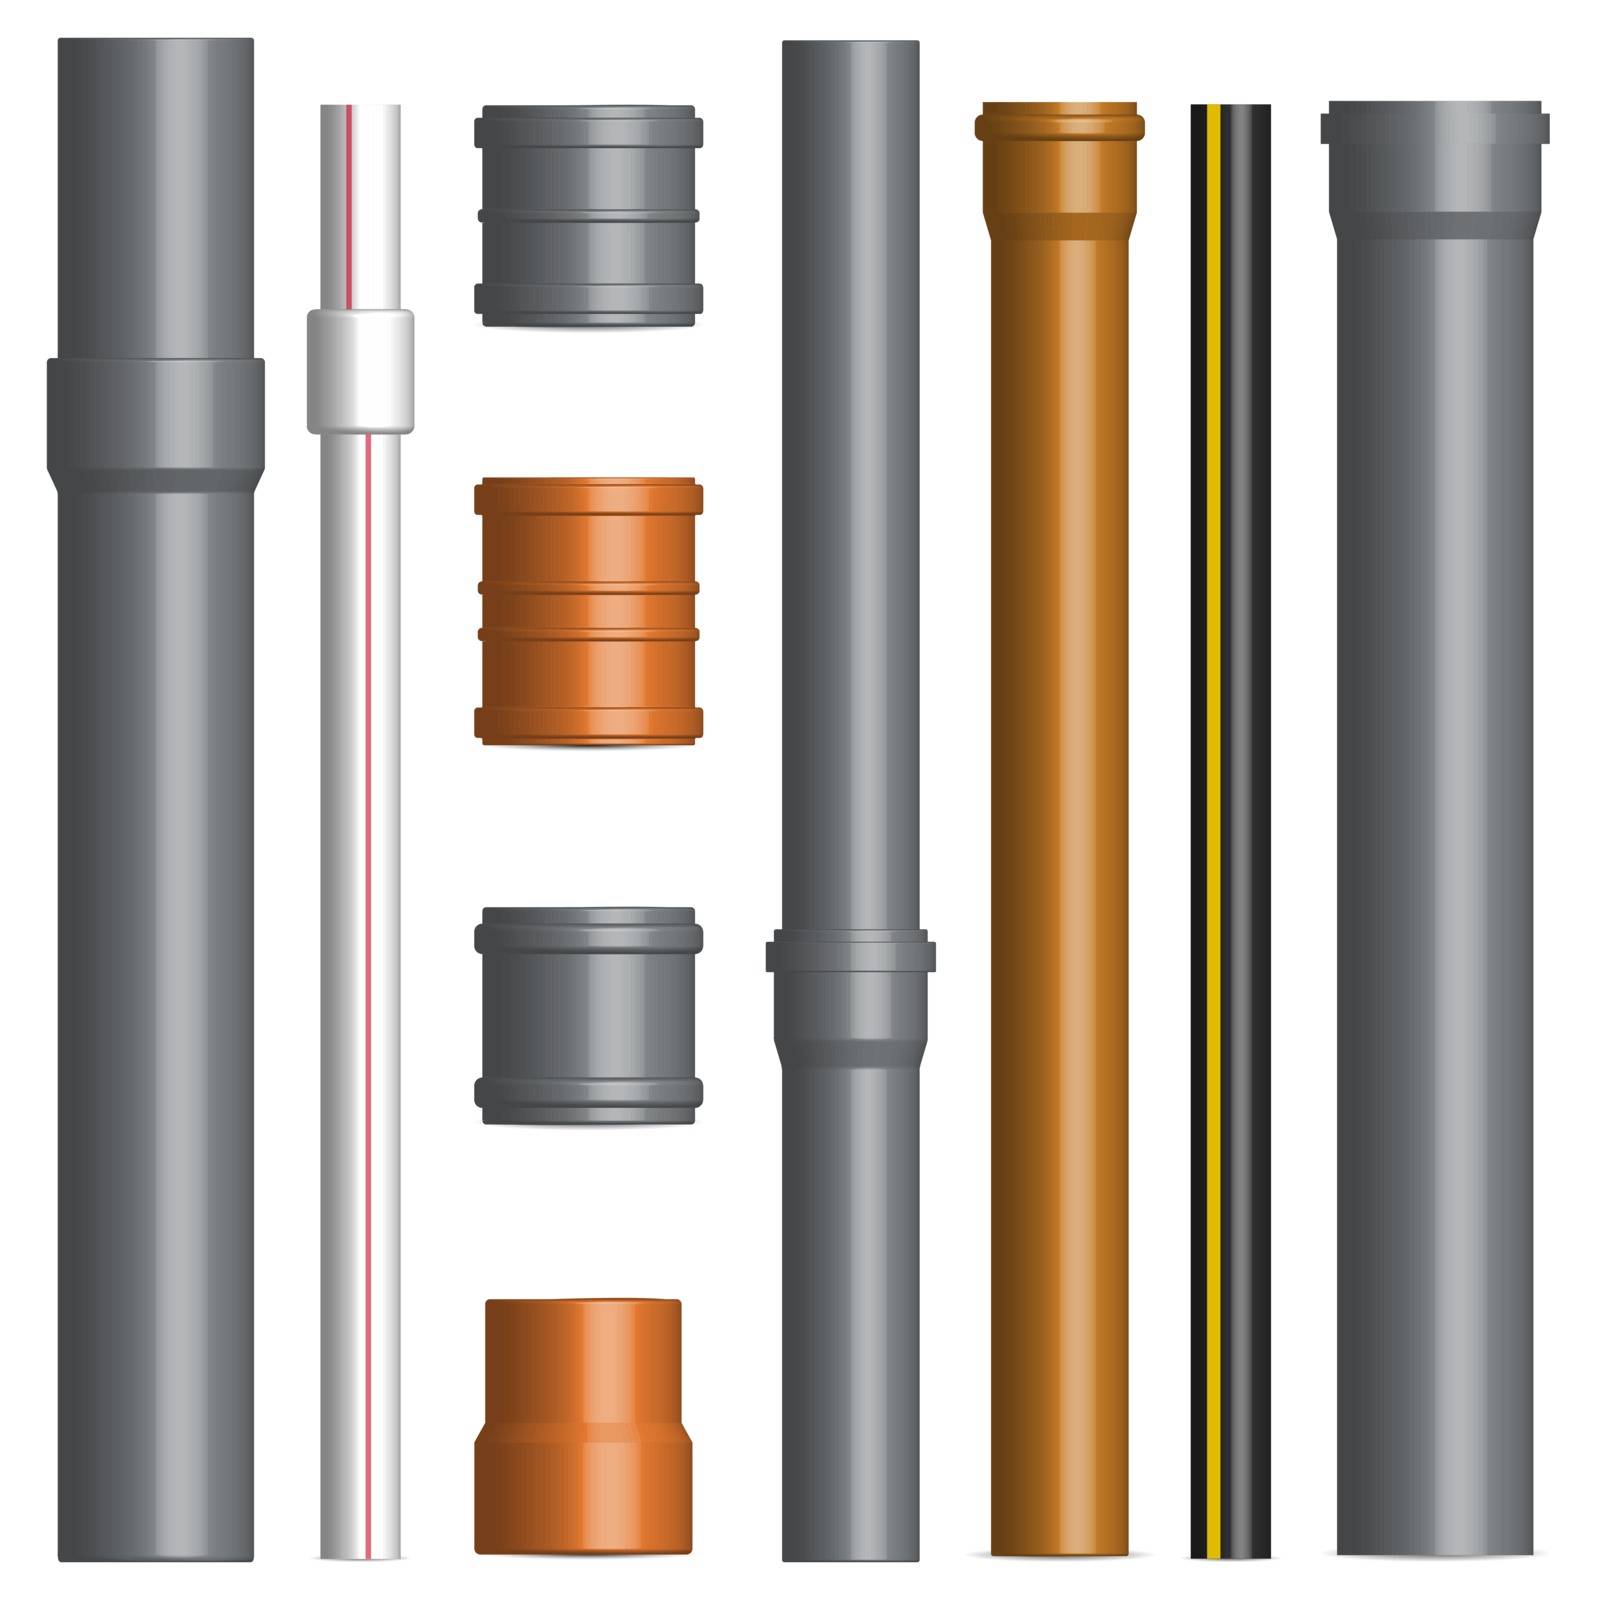 Set of various plastic pipes for sewage, water pipe with connecting flanges isolated on a white background. Front view, vector illustration.